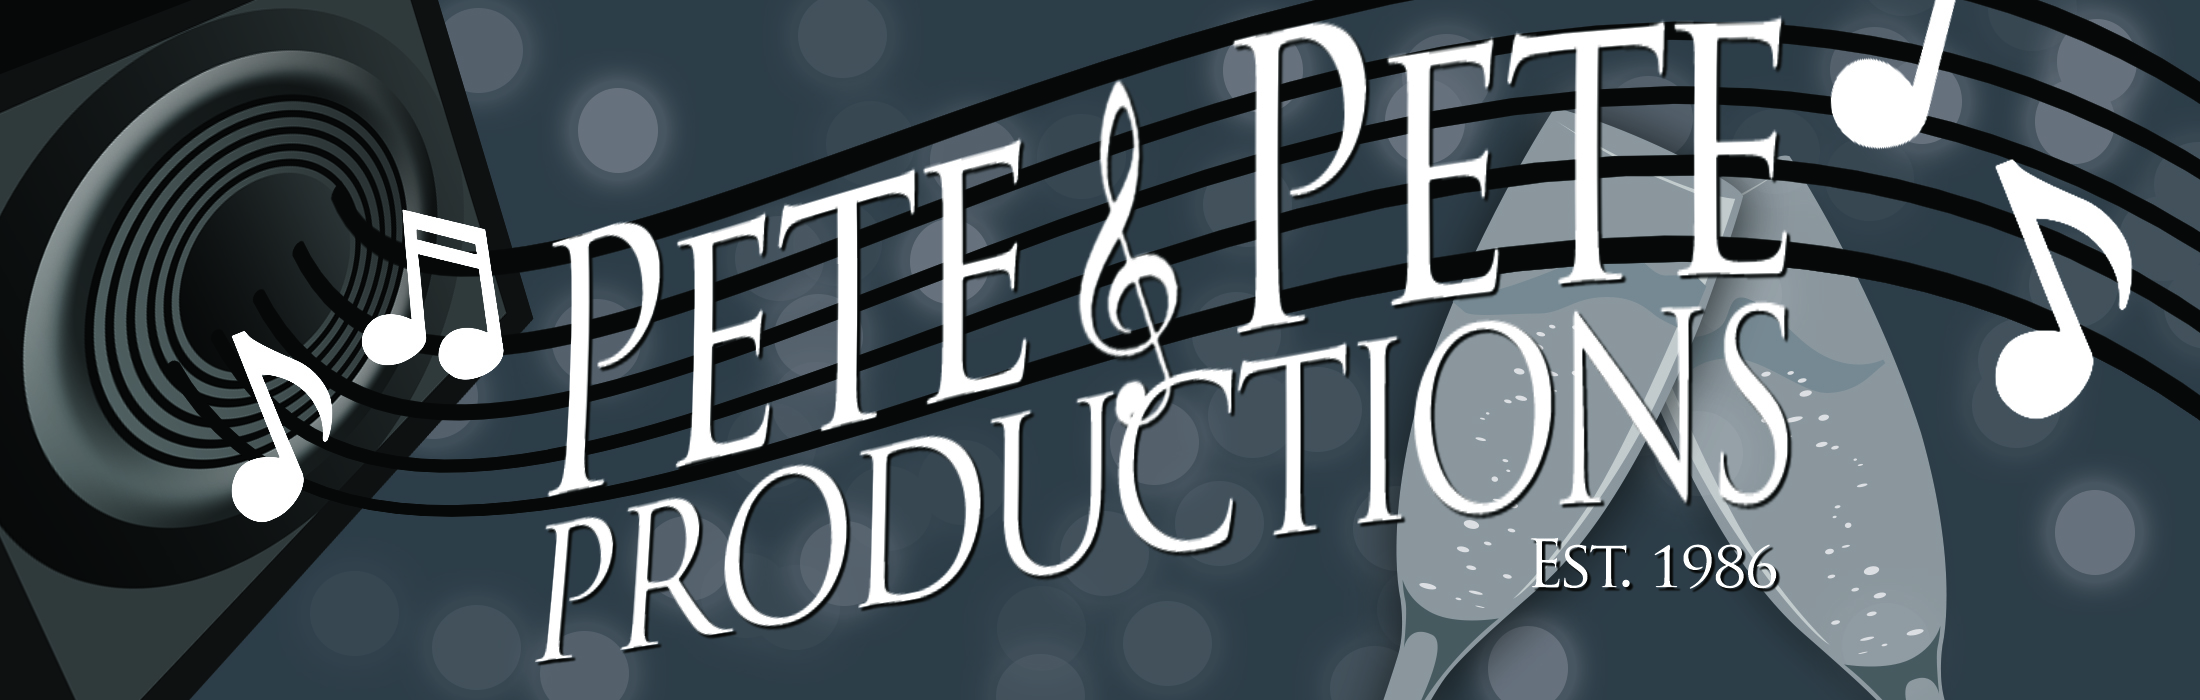 Pete and Pete Productions